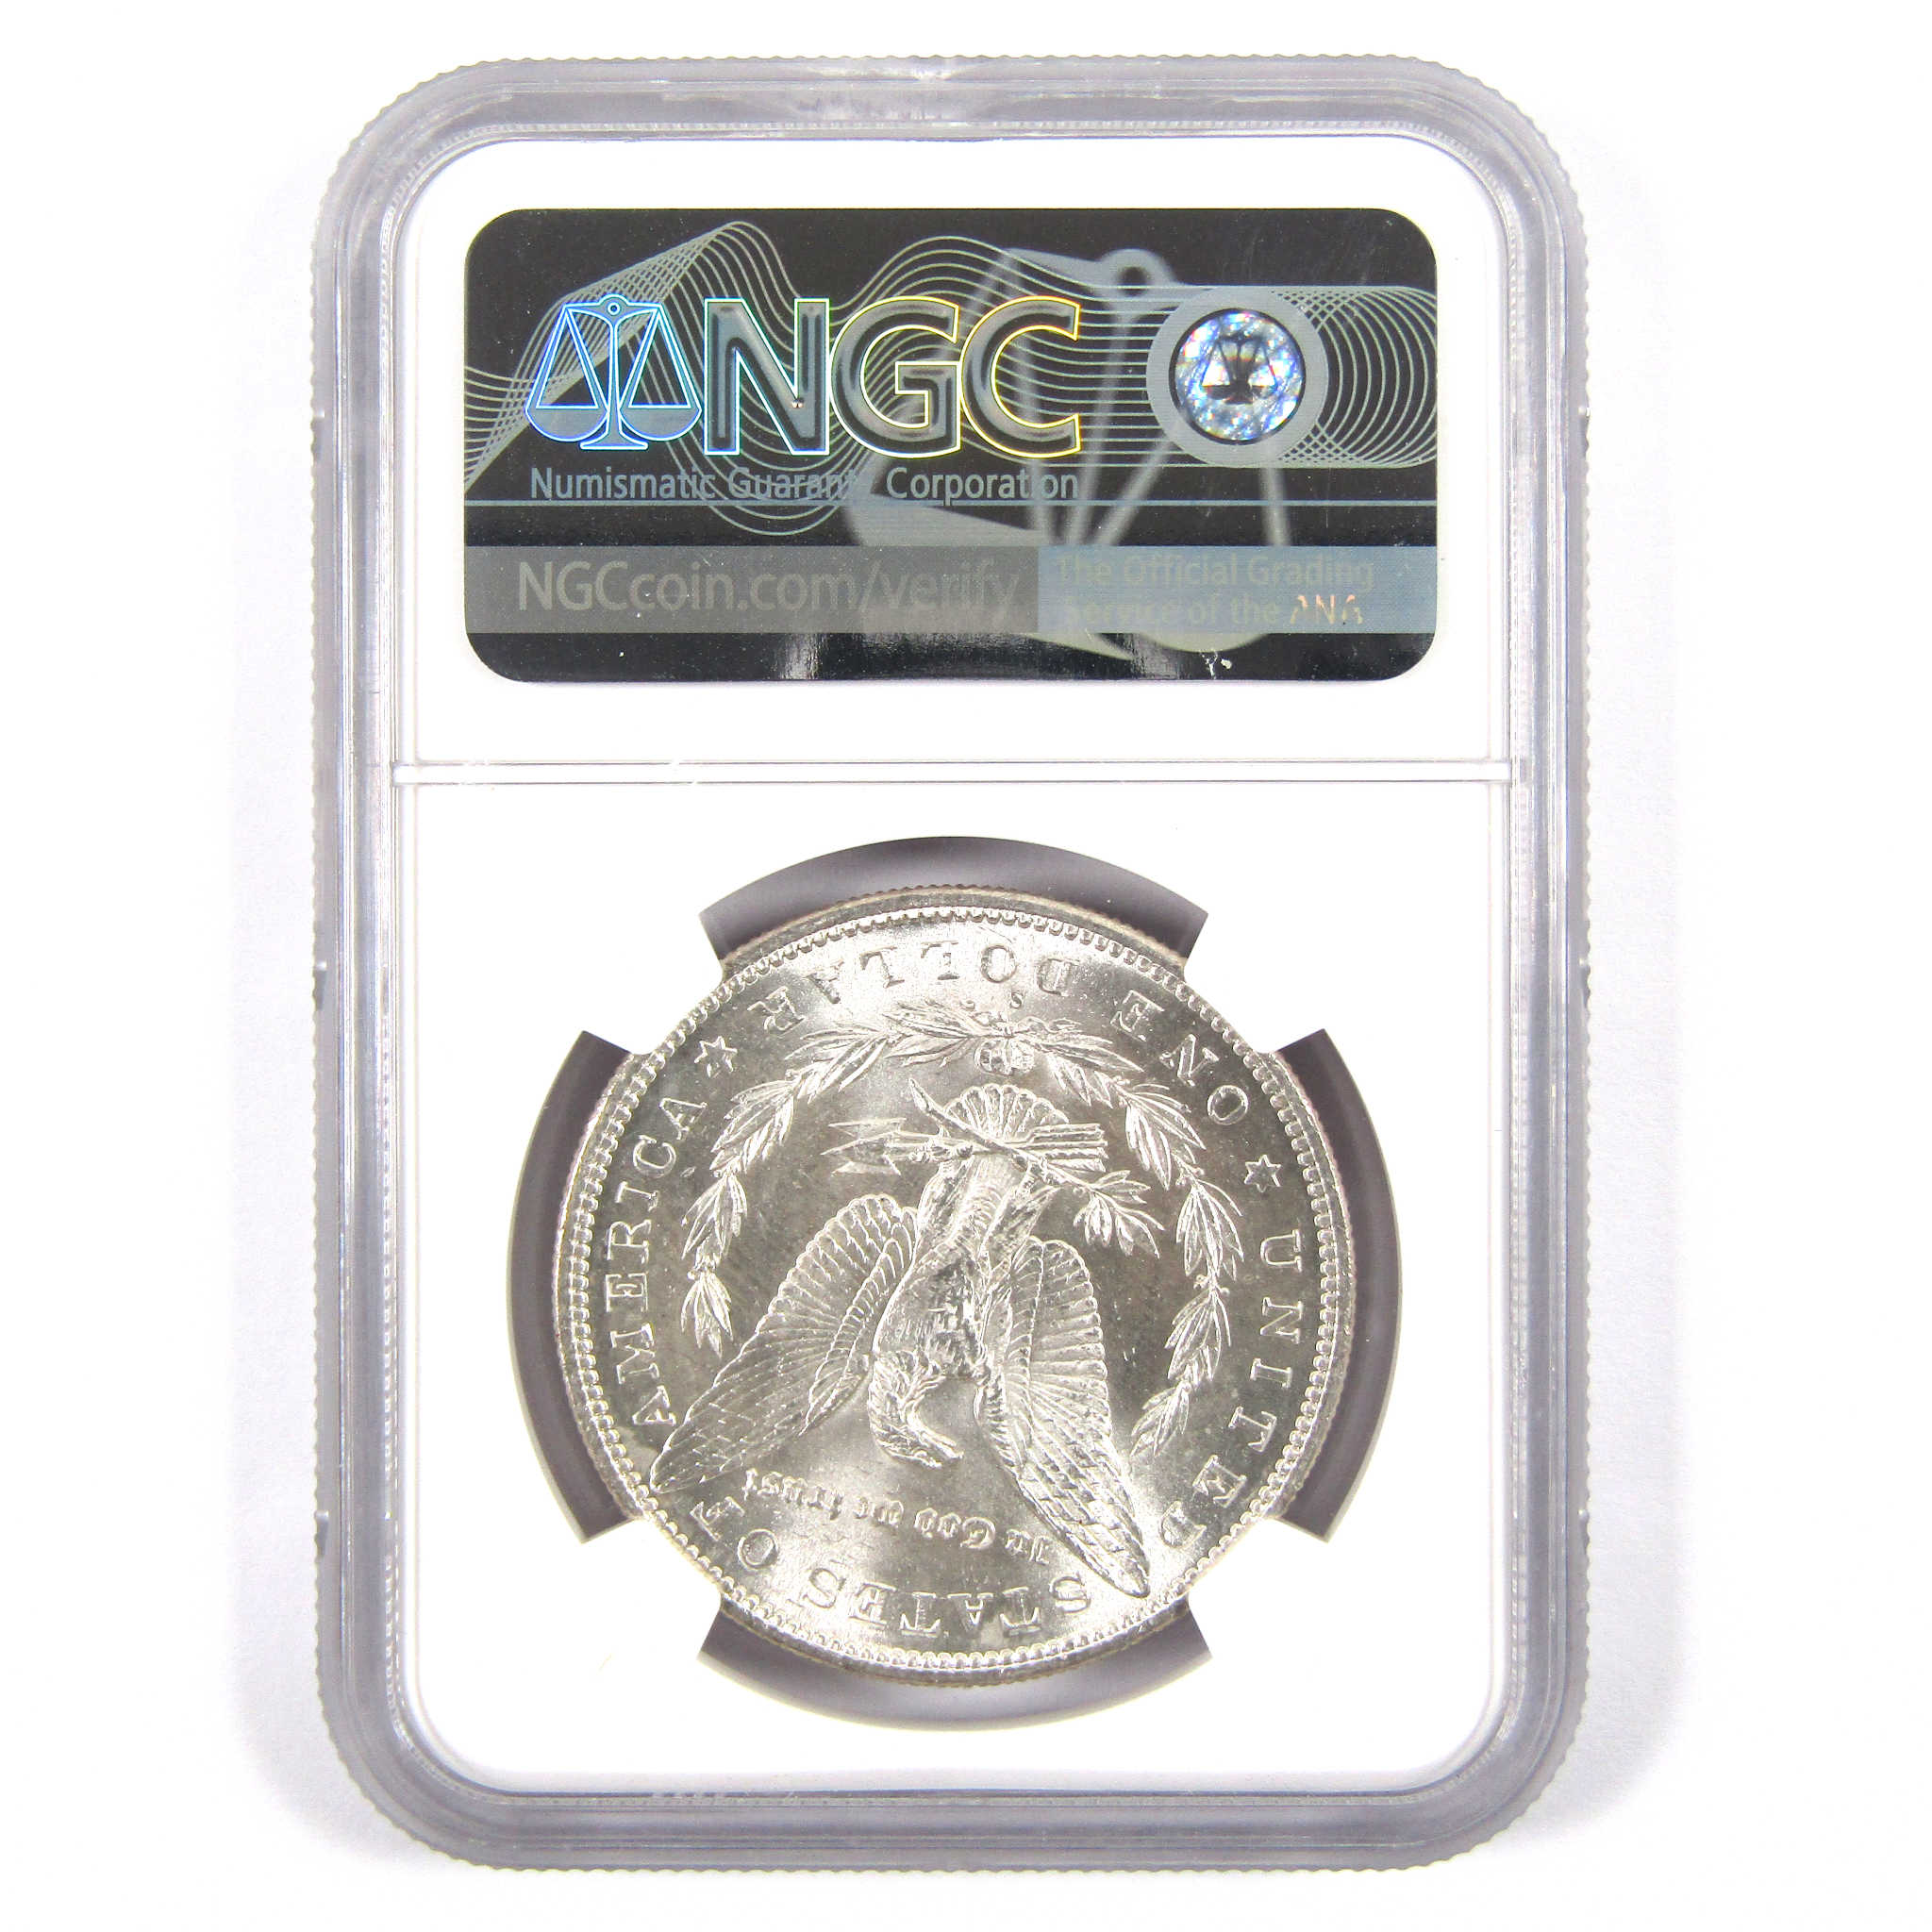 1888 S Morgan Dollar MS 62 NGC $1 Unc MSF Auction Slab SKU:I7550 - Morgan coin - Morgan silver dollar - Morgan silver dollar for sale - Profile Coins &amp; Collectibles